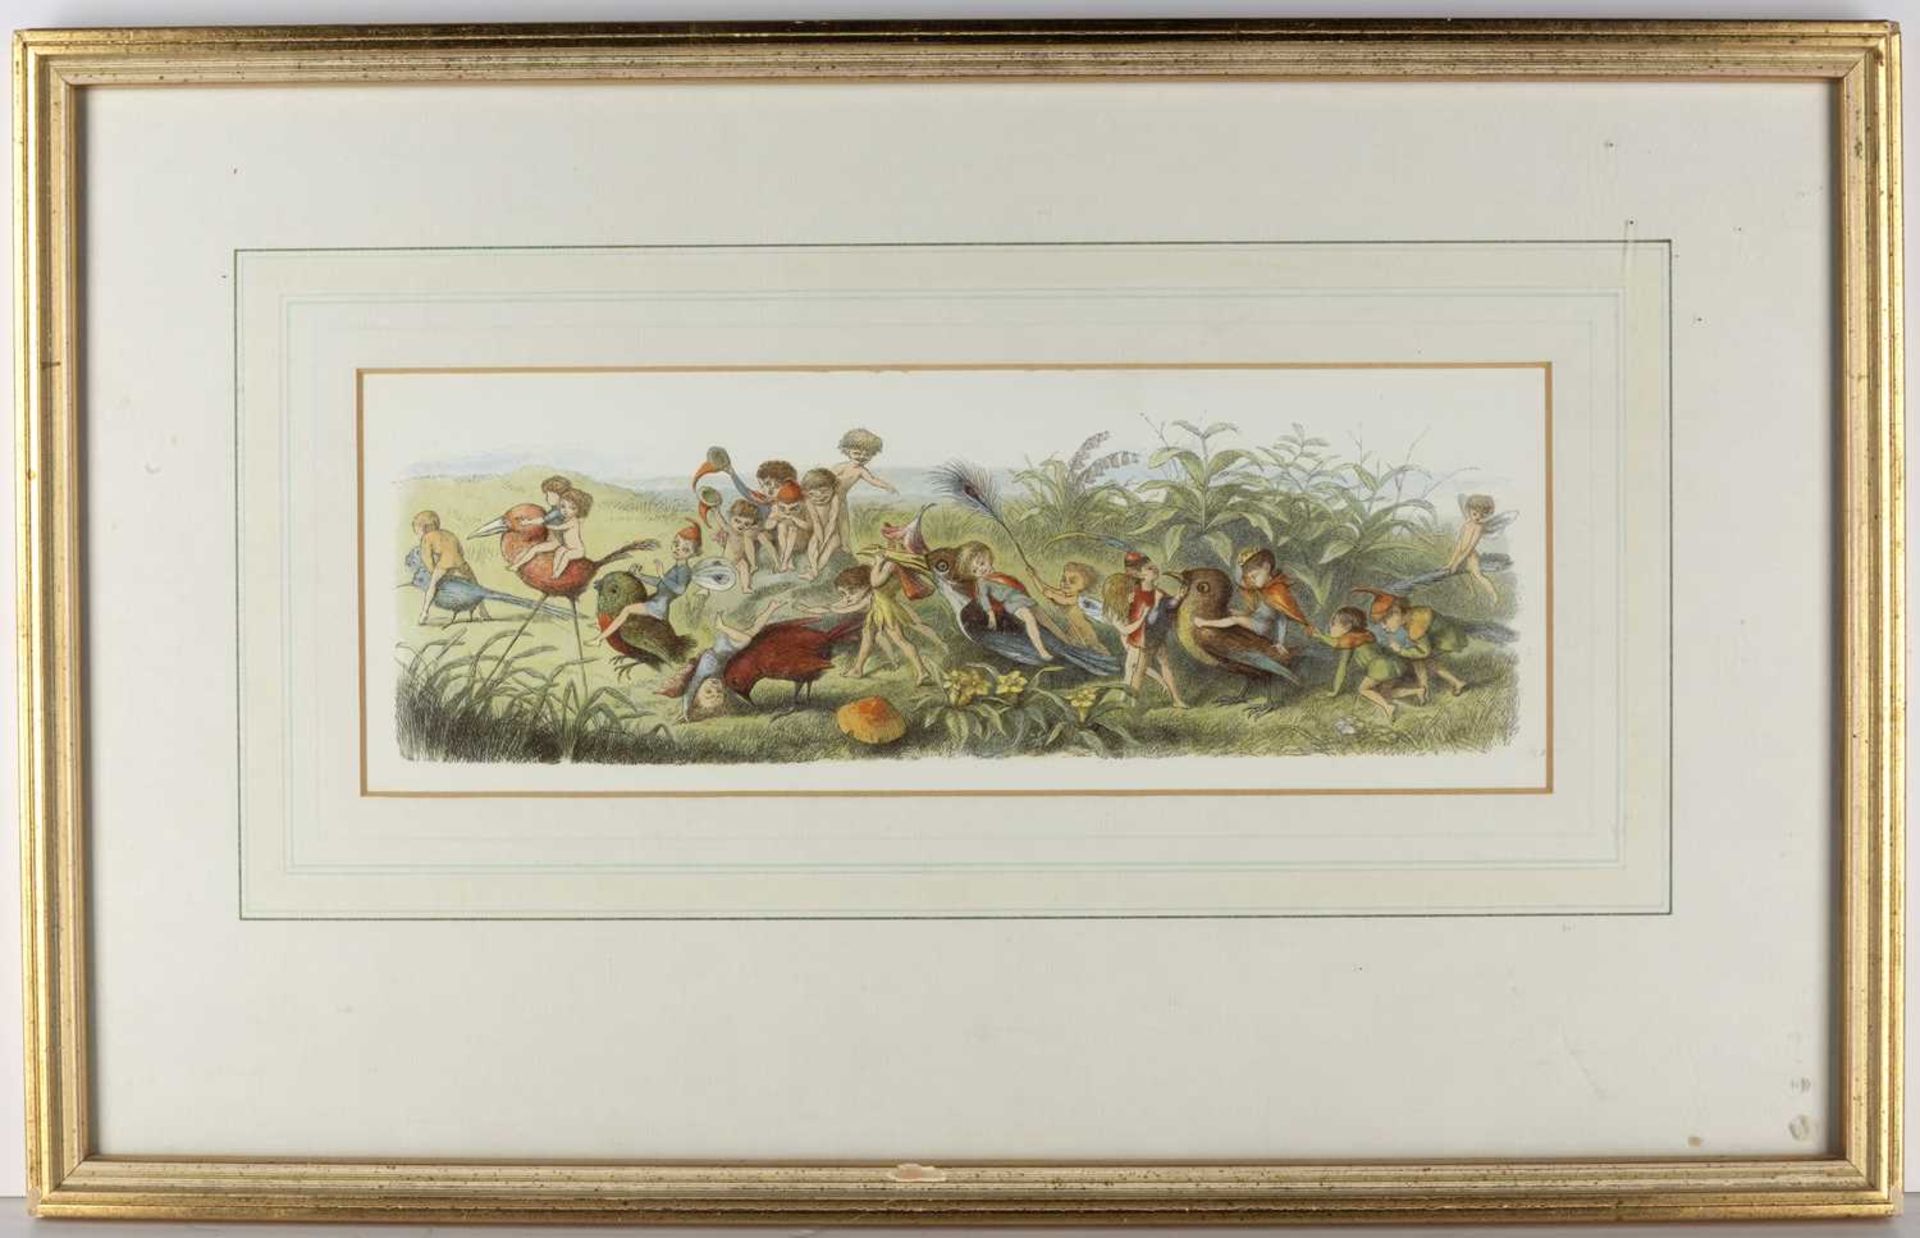 Richard Doyle (1824-1883) 'Wood elves at play', limited edition print, number 102/1500, with - Image 4 of 6